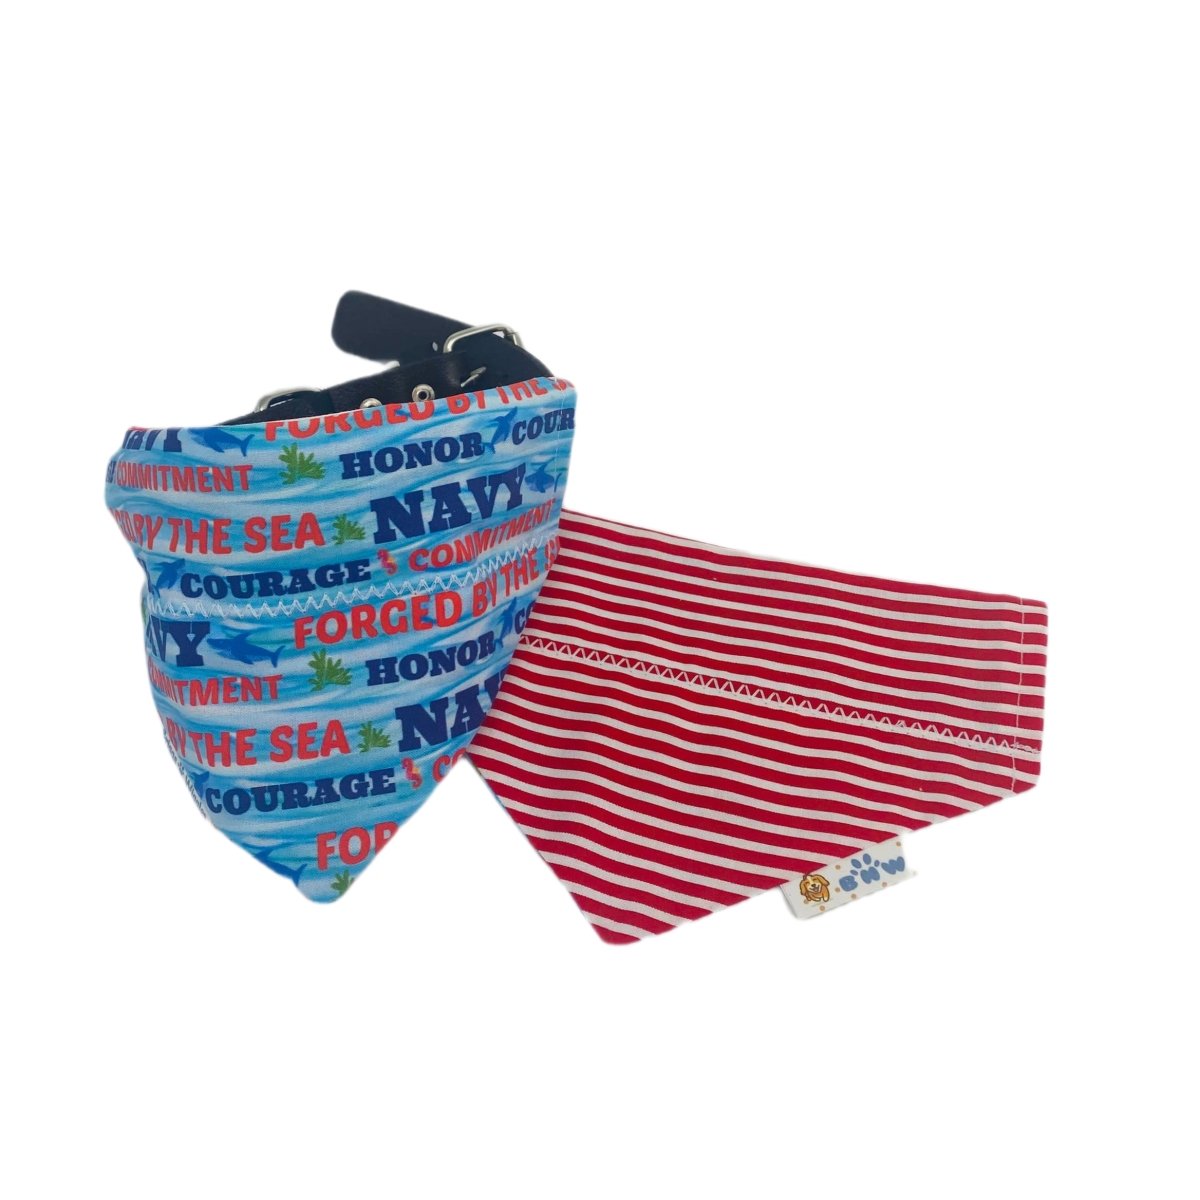 US Navy Forged by the Sea Dog Bandana - Briggs 'n' Wiggles